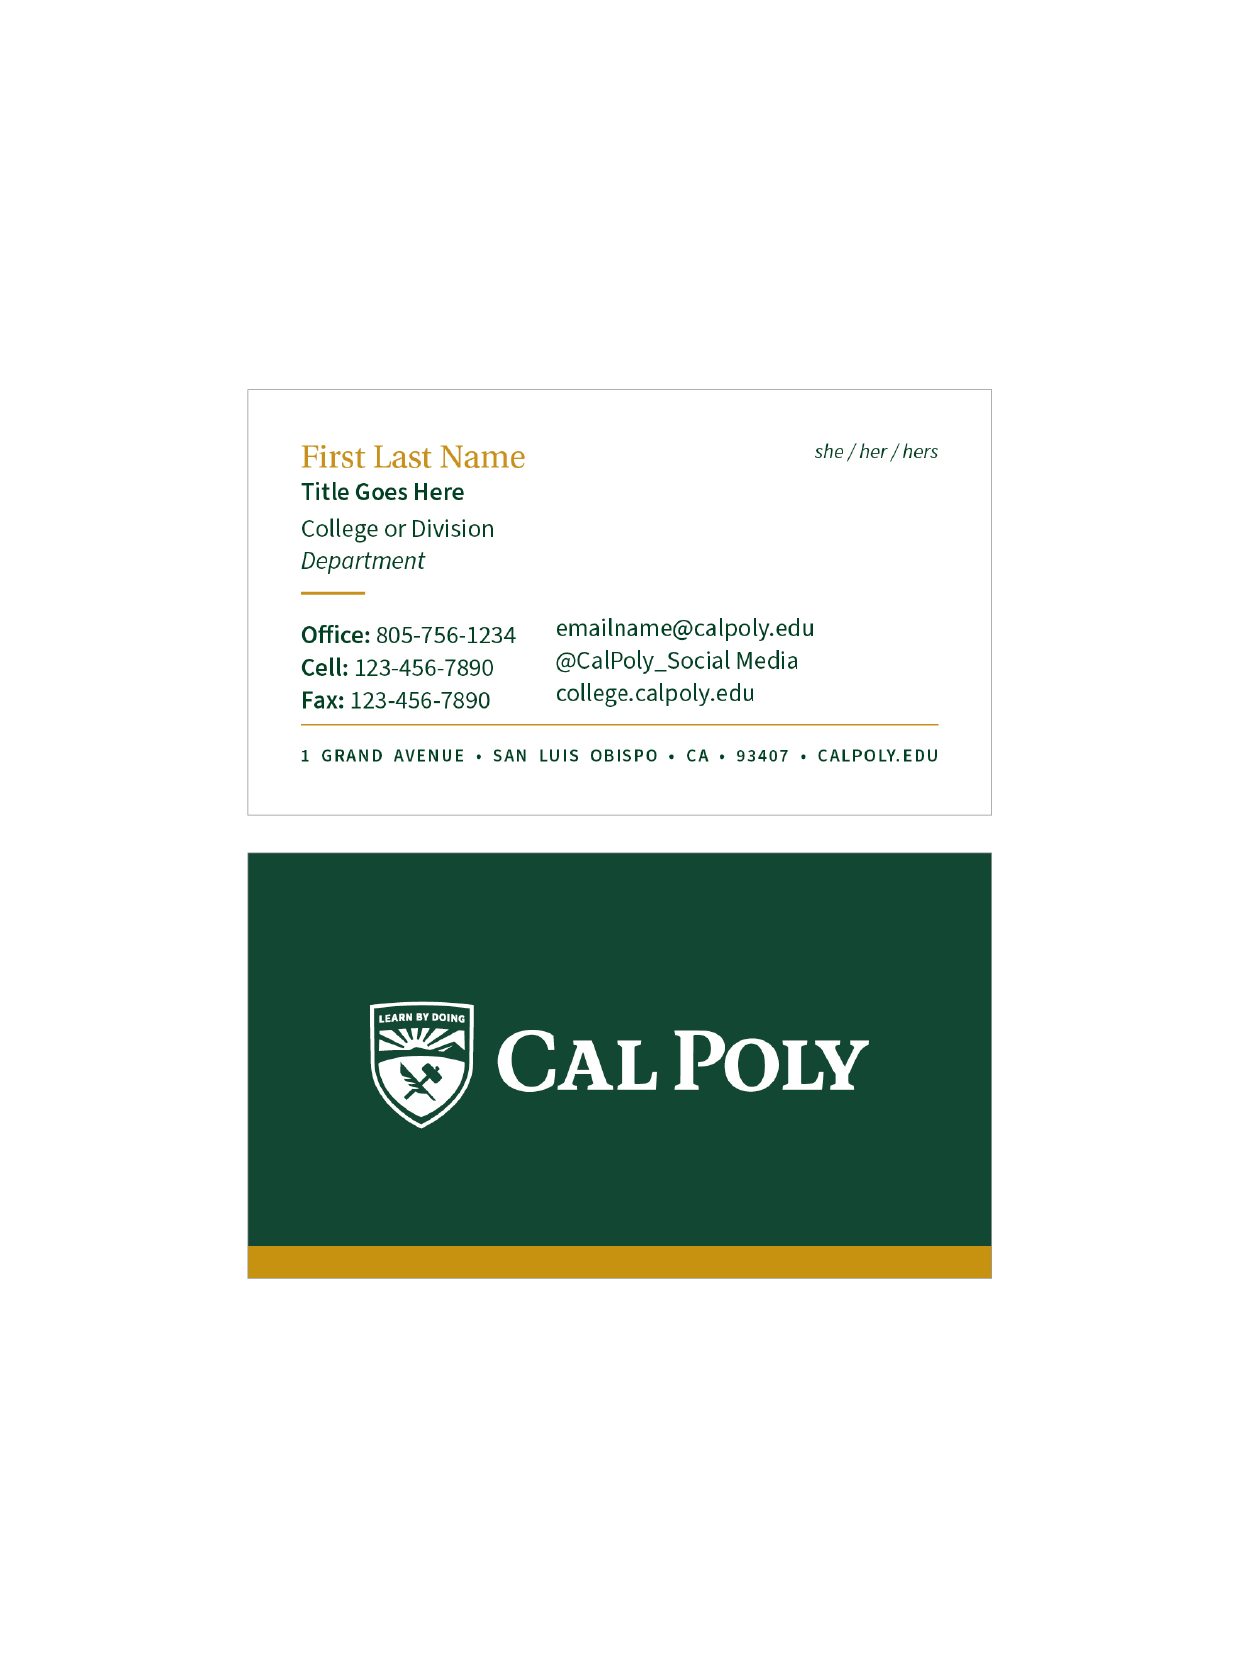 Example of business cards